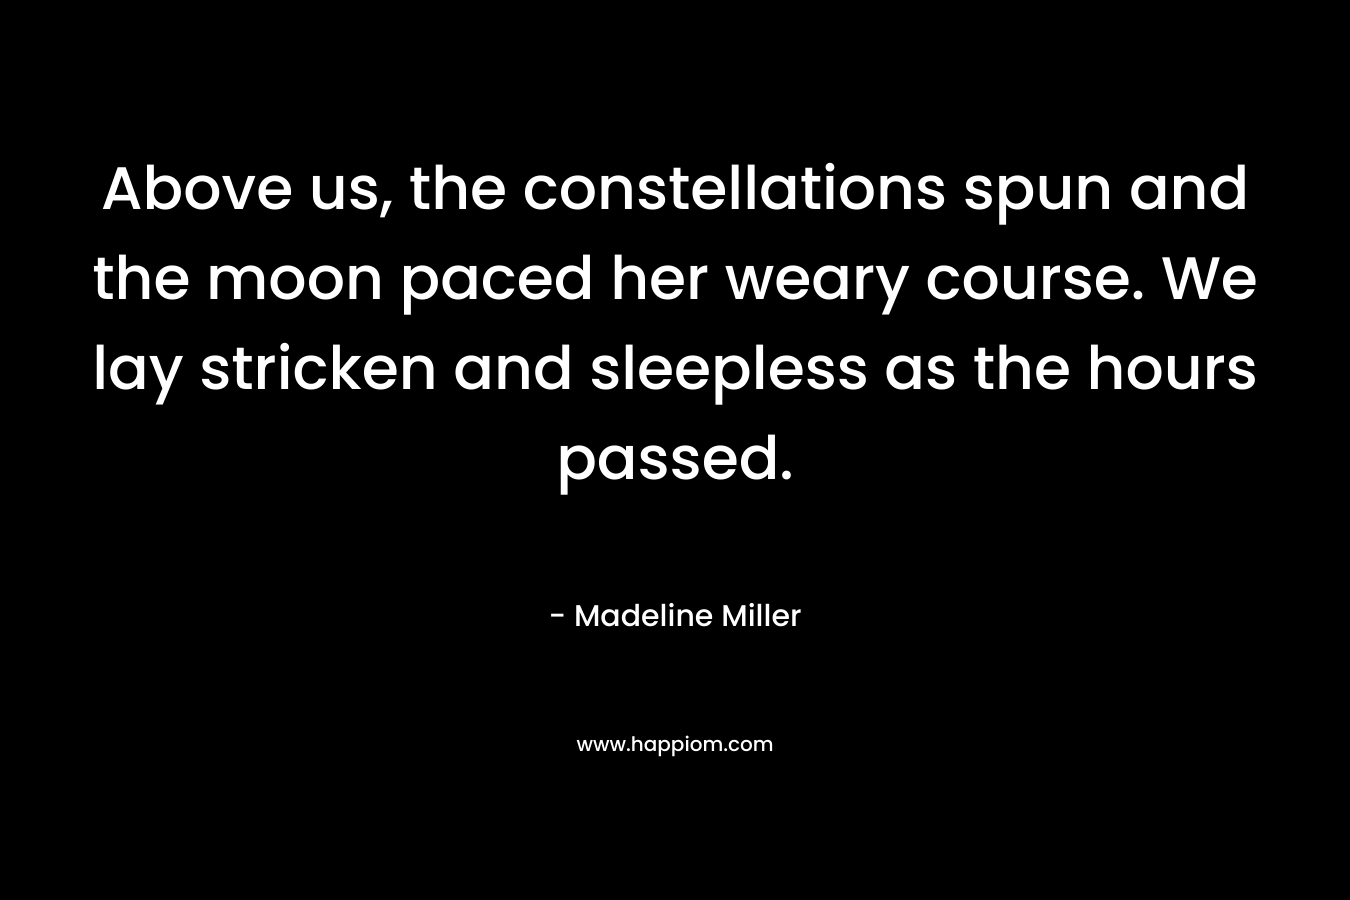 Above us, the constellations spun and the moon paced her weary course. We lay stricken and sleepless as the hours passed.